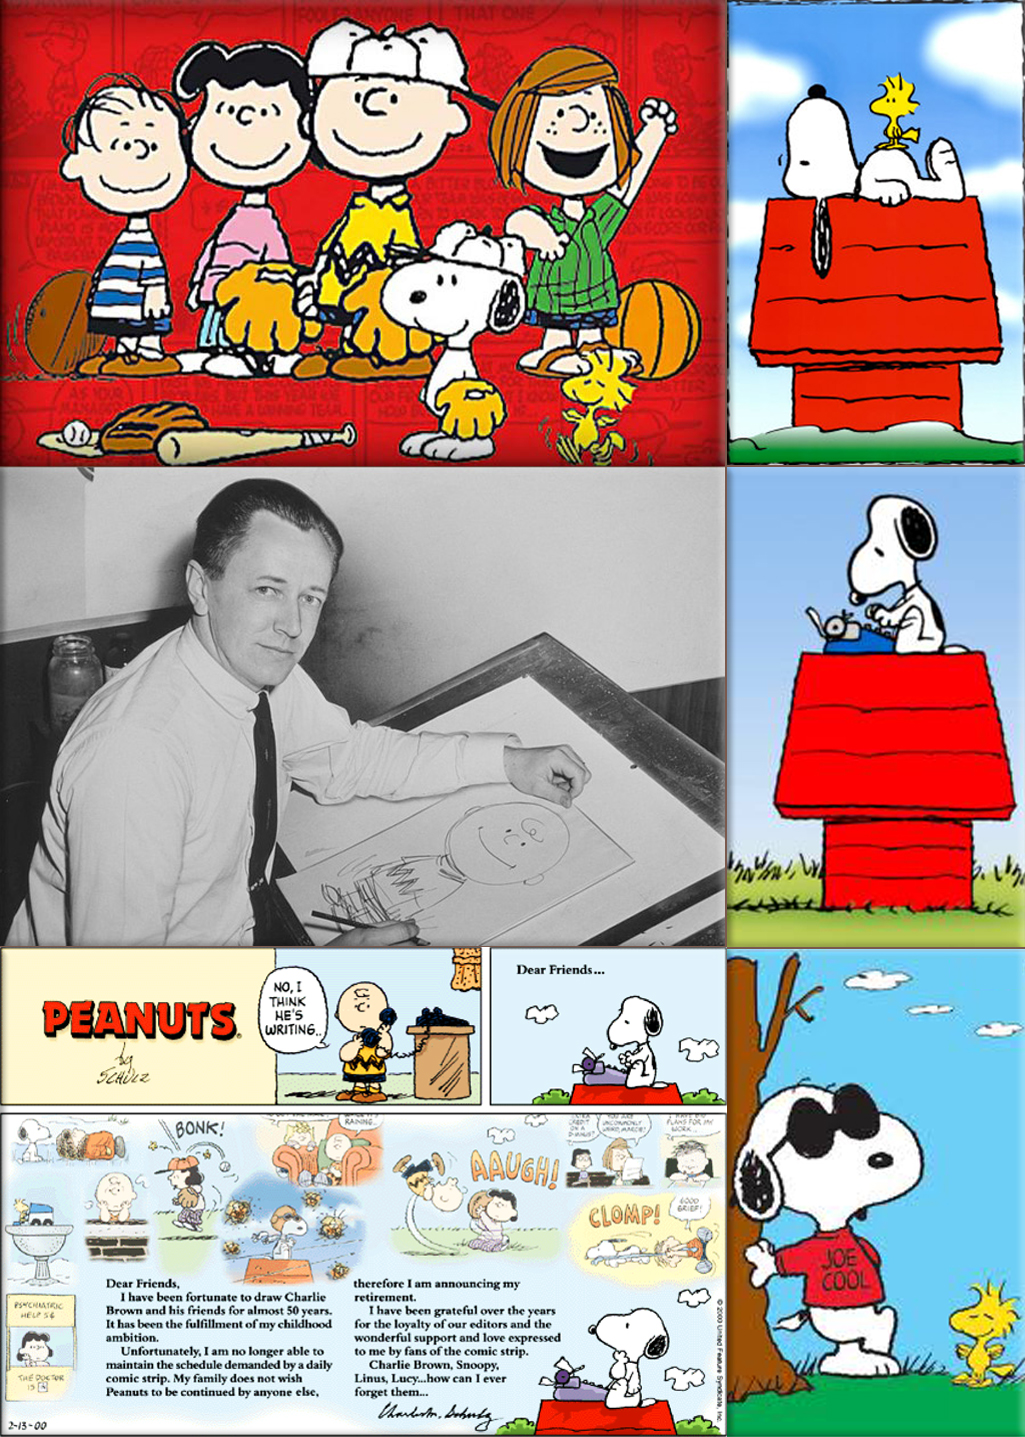 Peanuts by Charles M. Schulz is first published on October 2nd, 1950.